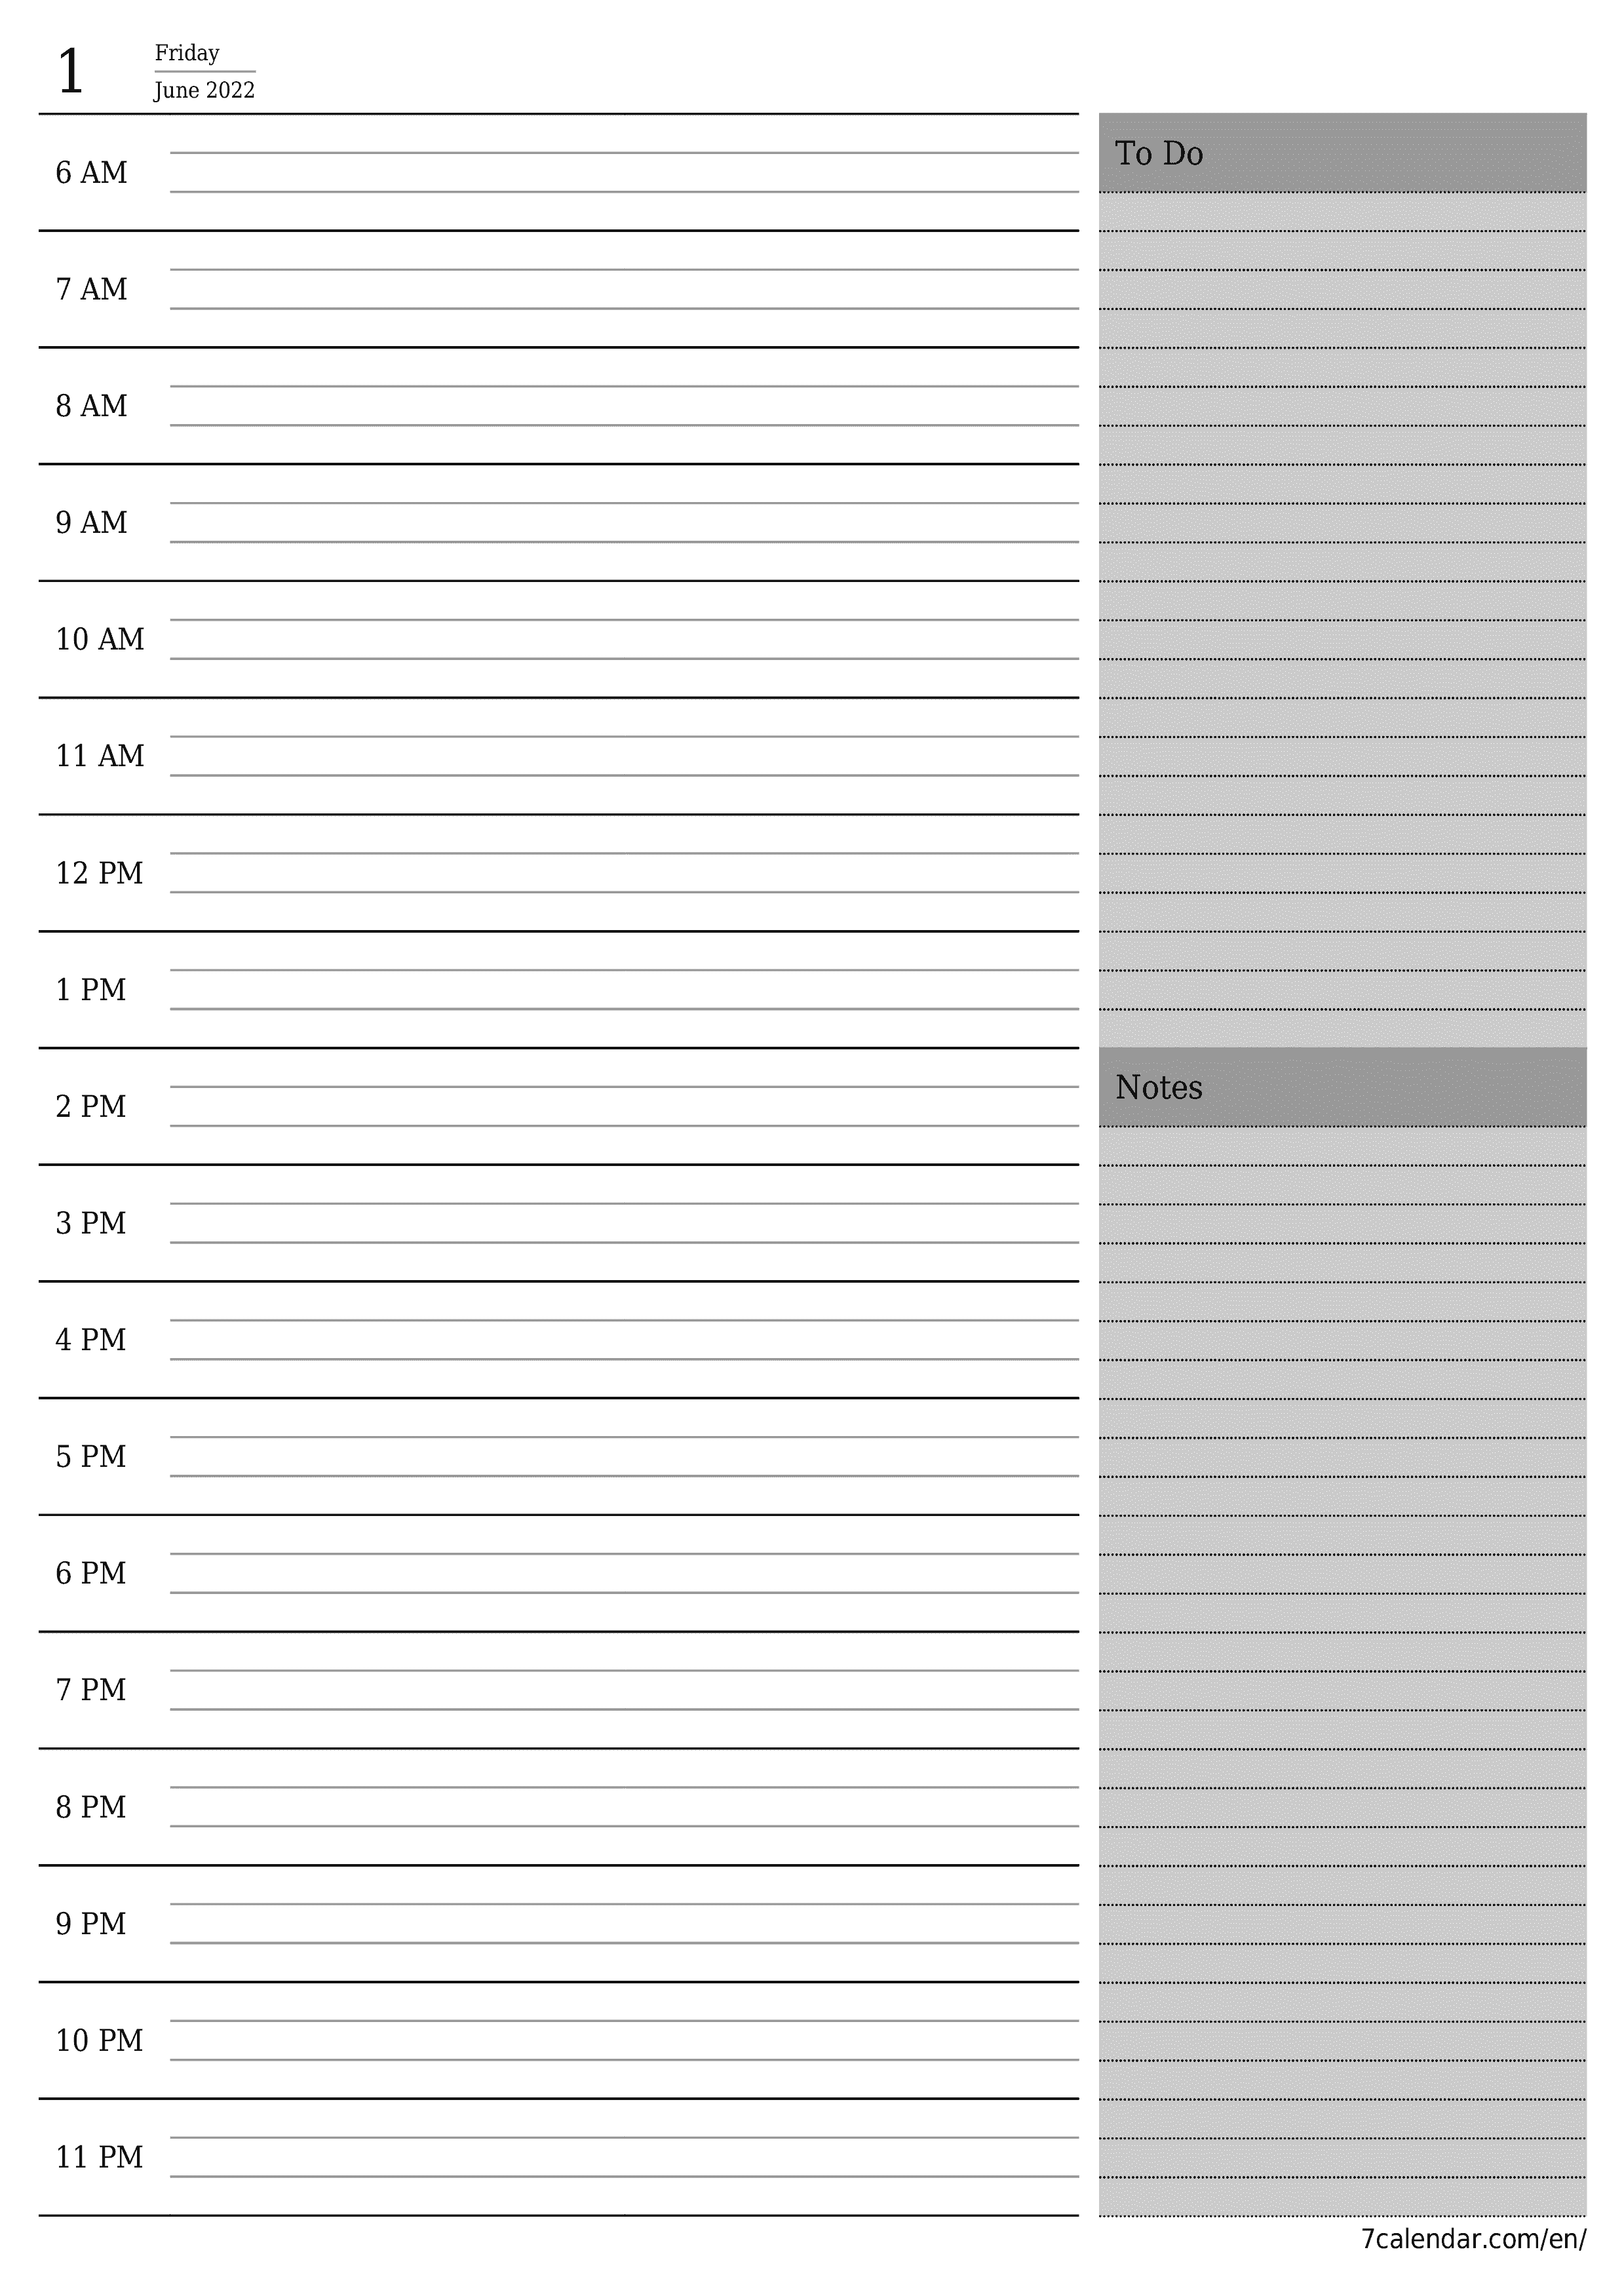 Blank daily printable calendar and planner for day June 2022 with notes, save and print to PDF PNG English - 7calendar.com